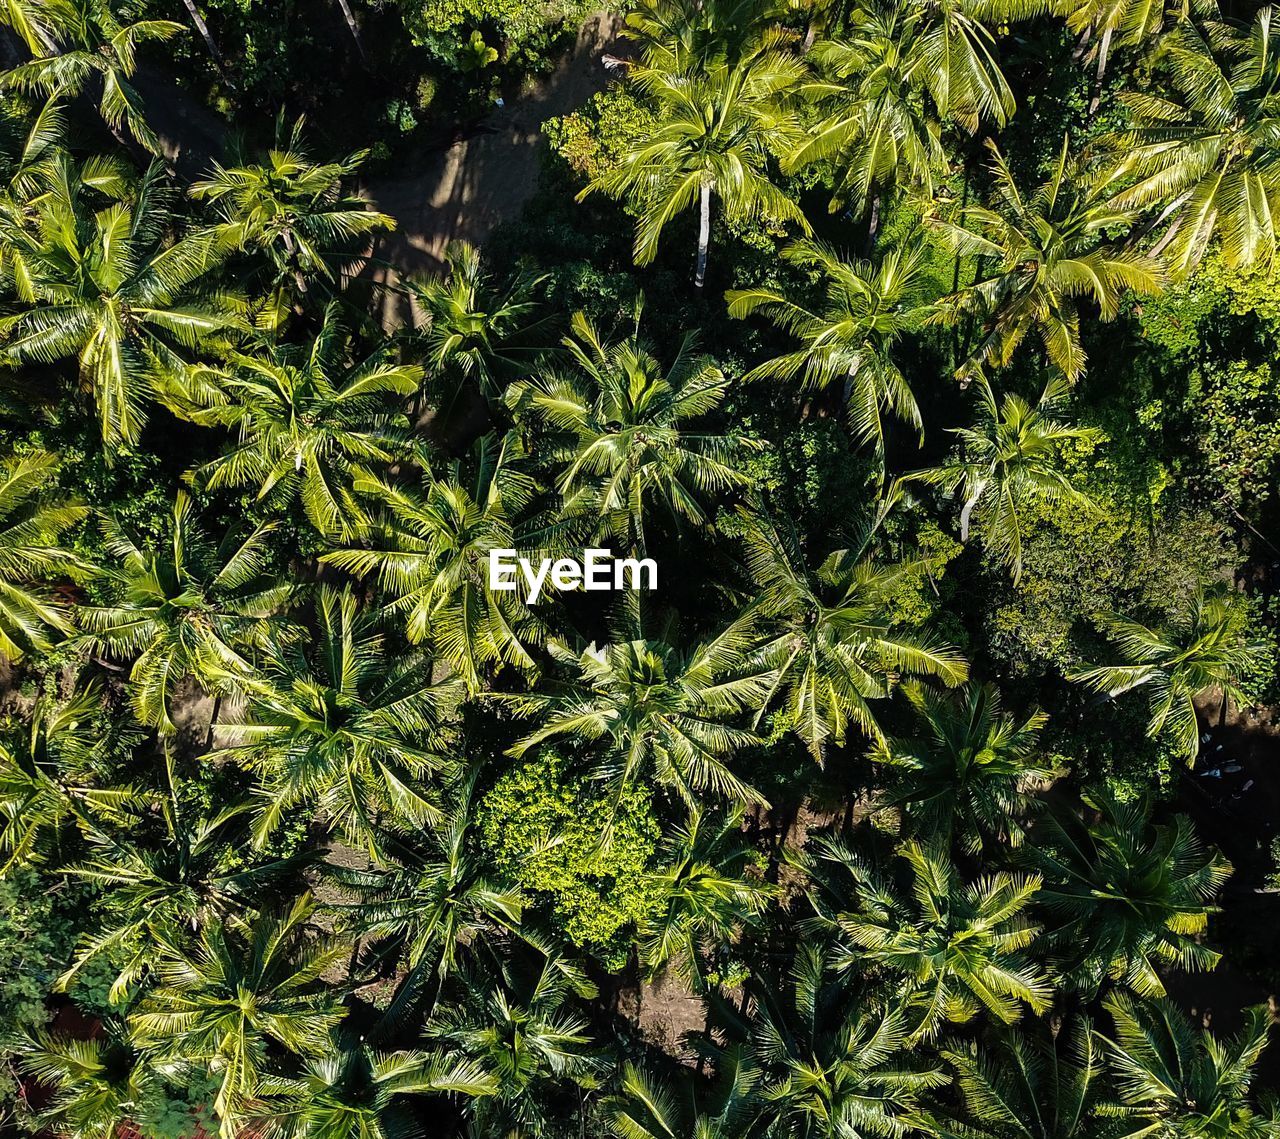 Aerial view of palms growing outdoors